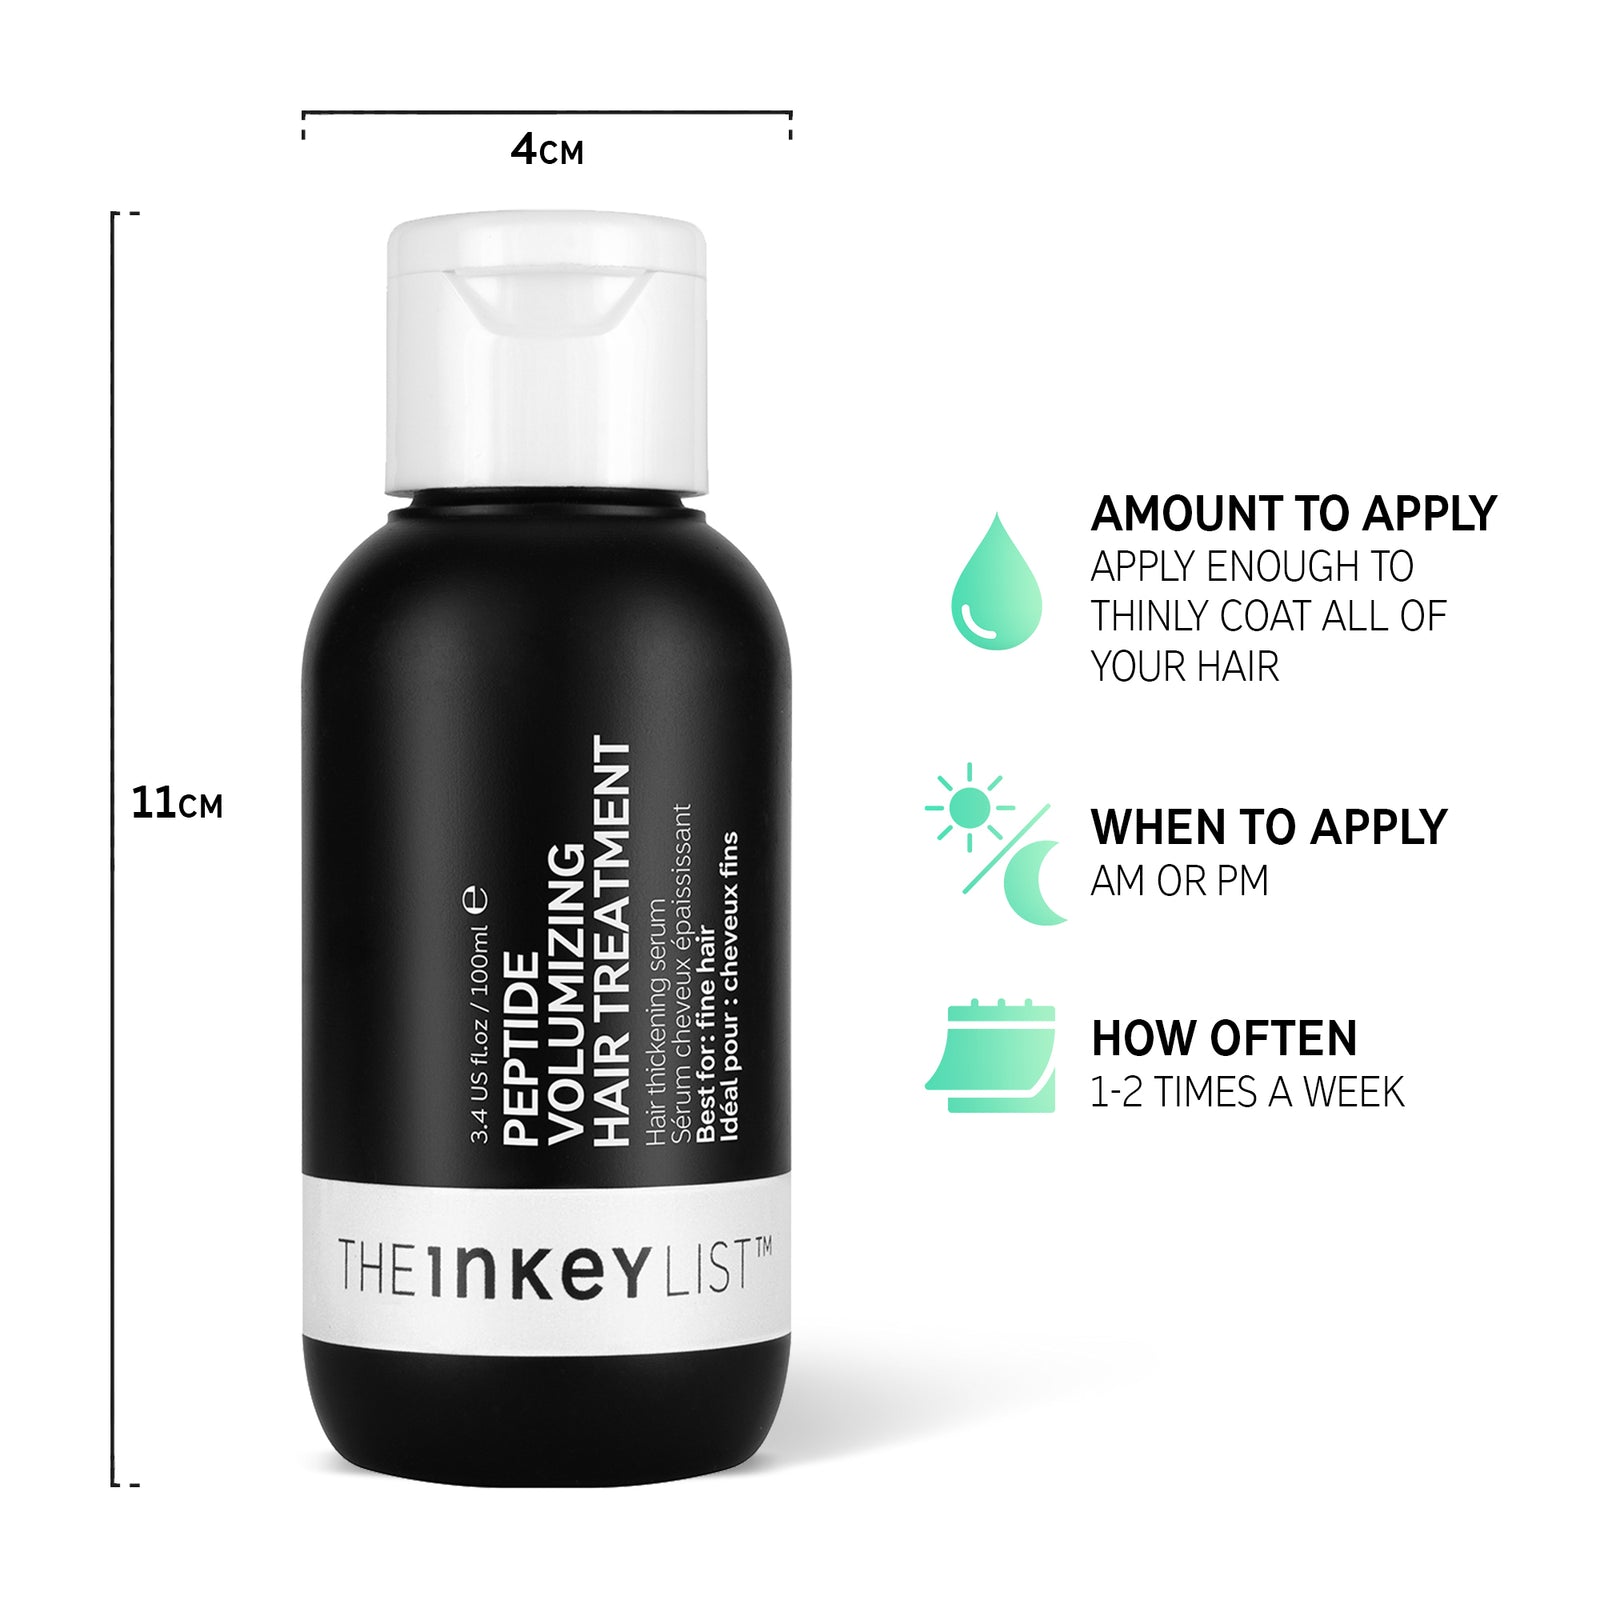 Peptide Volumizing Hair Treatment bottle with when and how to use infographic. Product dimension 11cm x 4cm